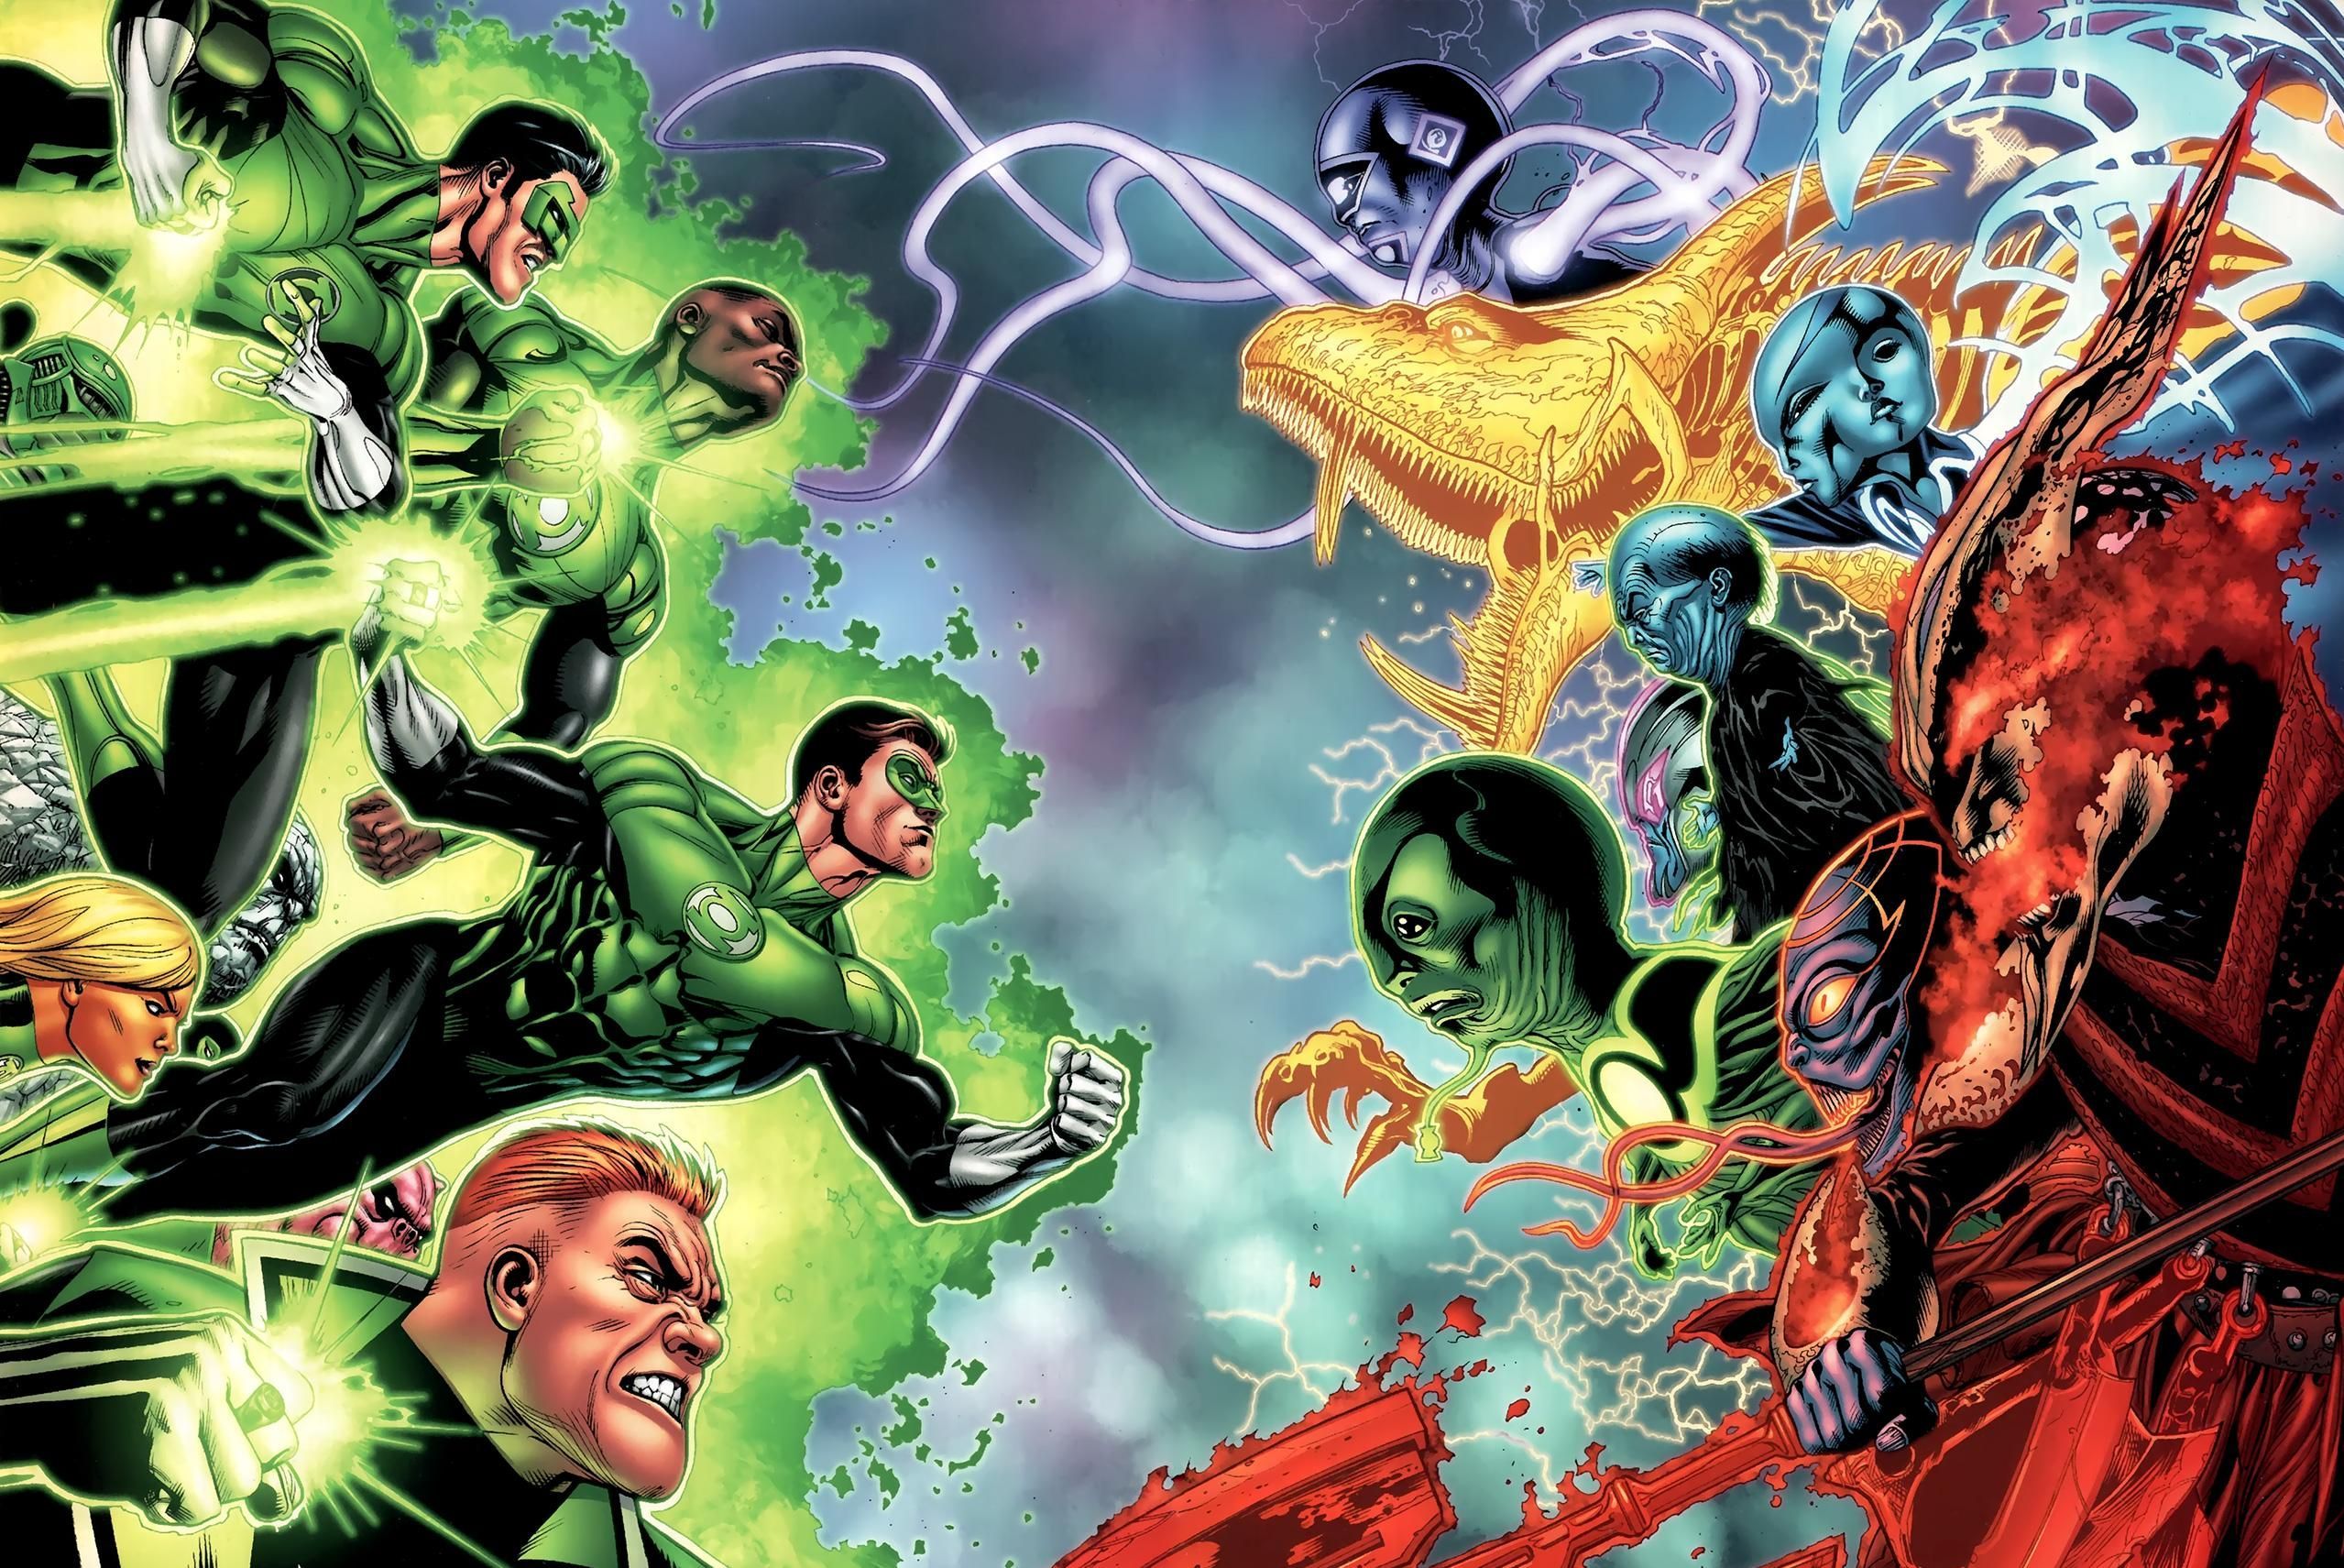 Green Lantern Corps: The Corps vs. Krona and The Guardians of The Universe. Green lantern wallpaper, Green lantern corps, Green lantern